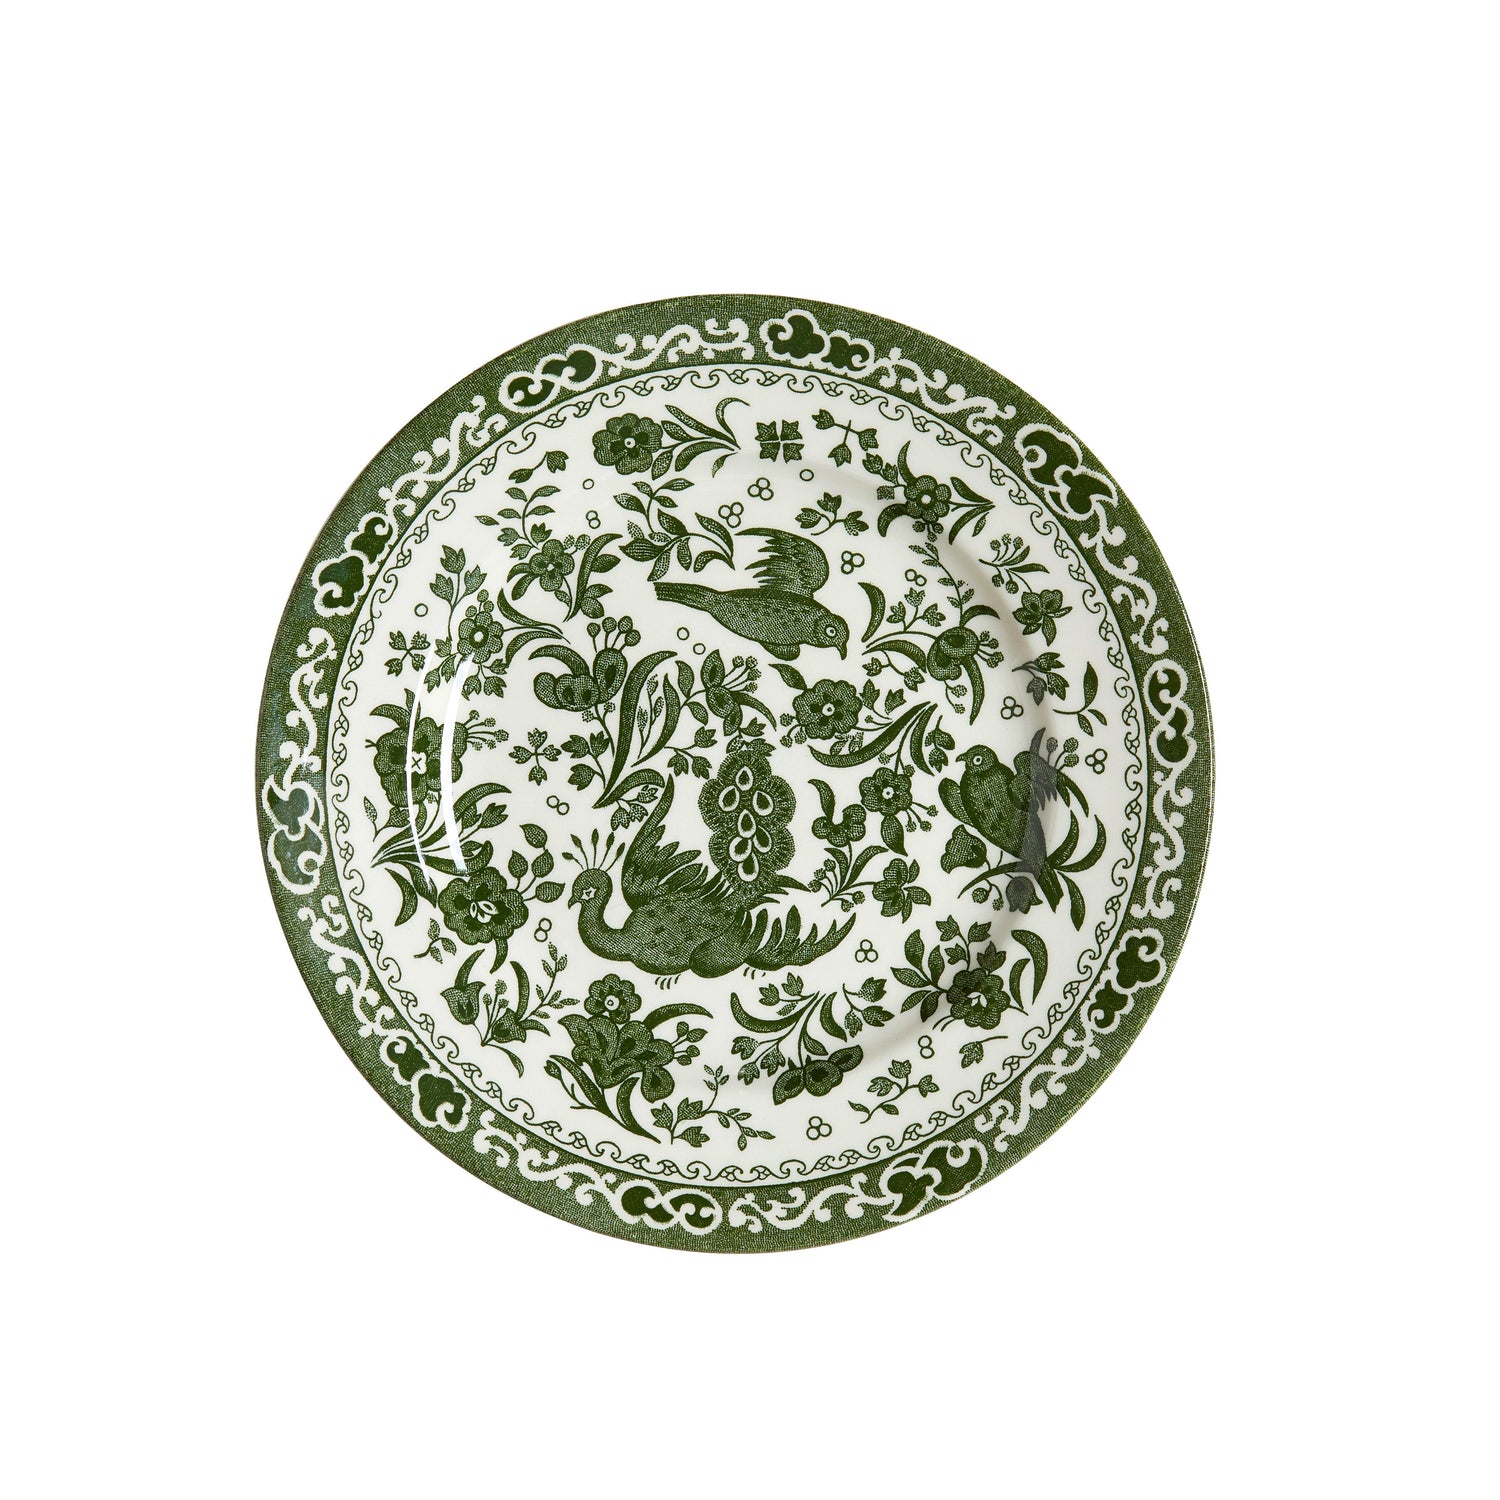 A table setting with a green and white place setting that features Burleigh&